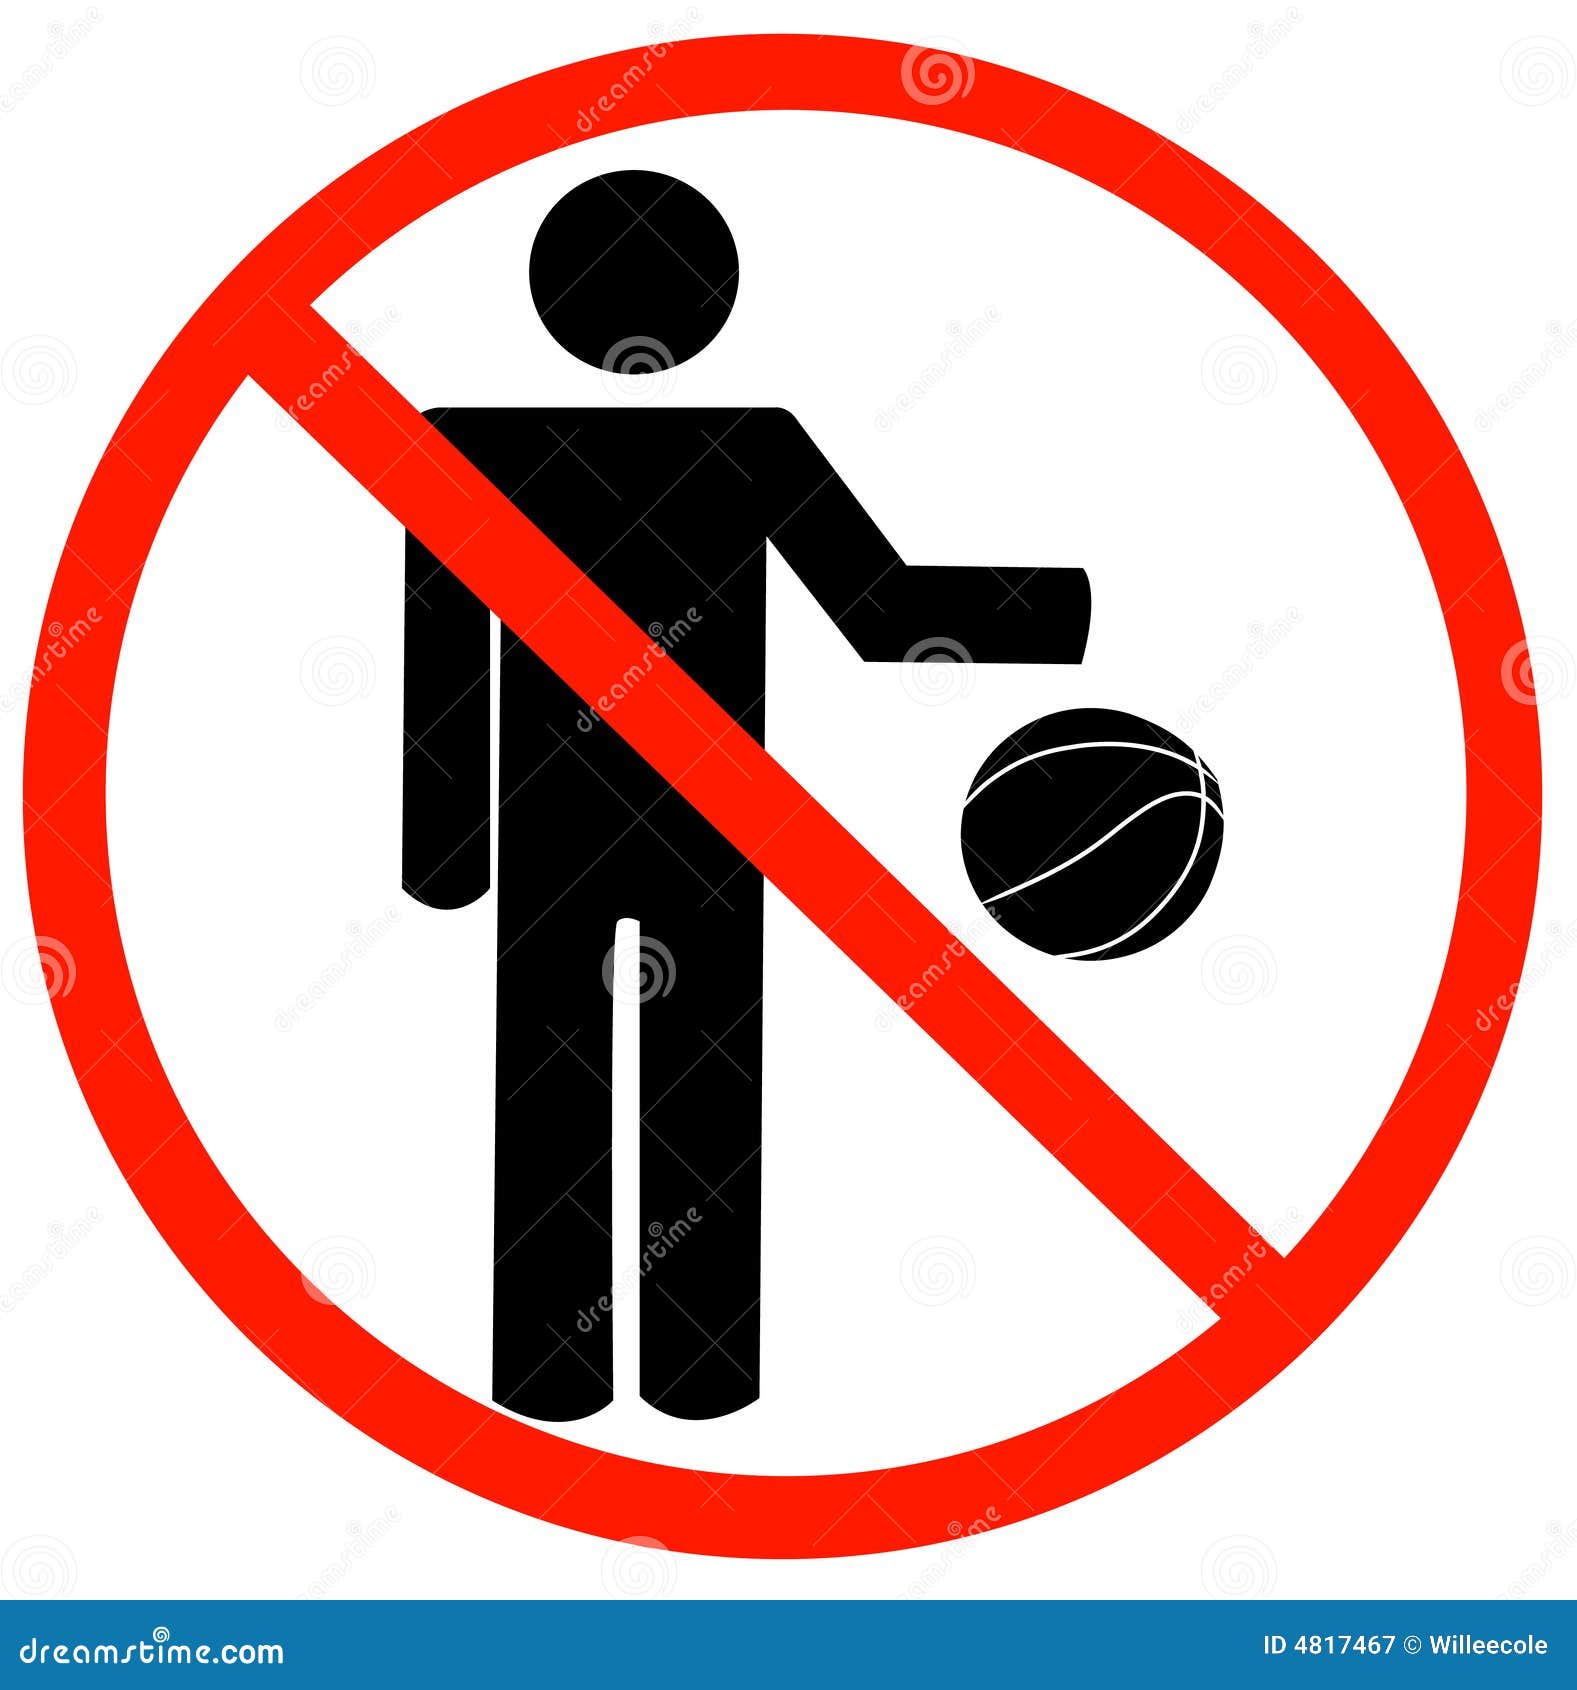 No Playing Allowed Royalty Free Stock Photography - Image: 48174671371 x 1300